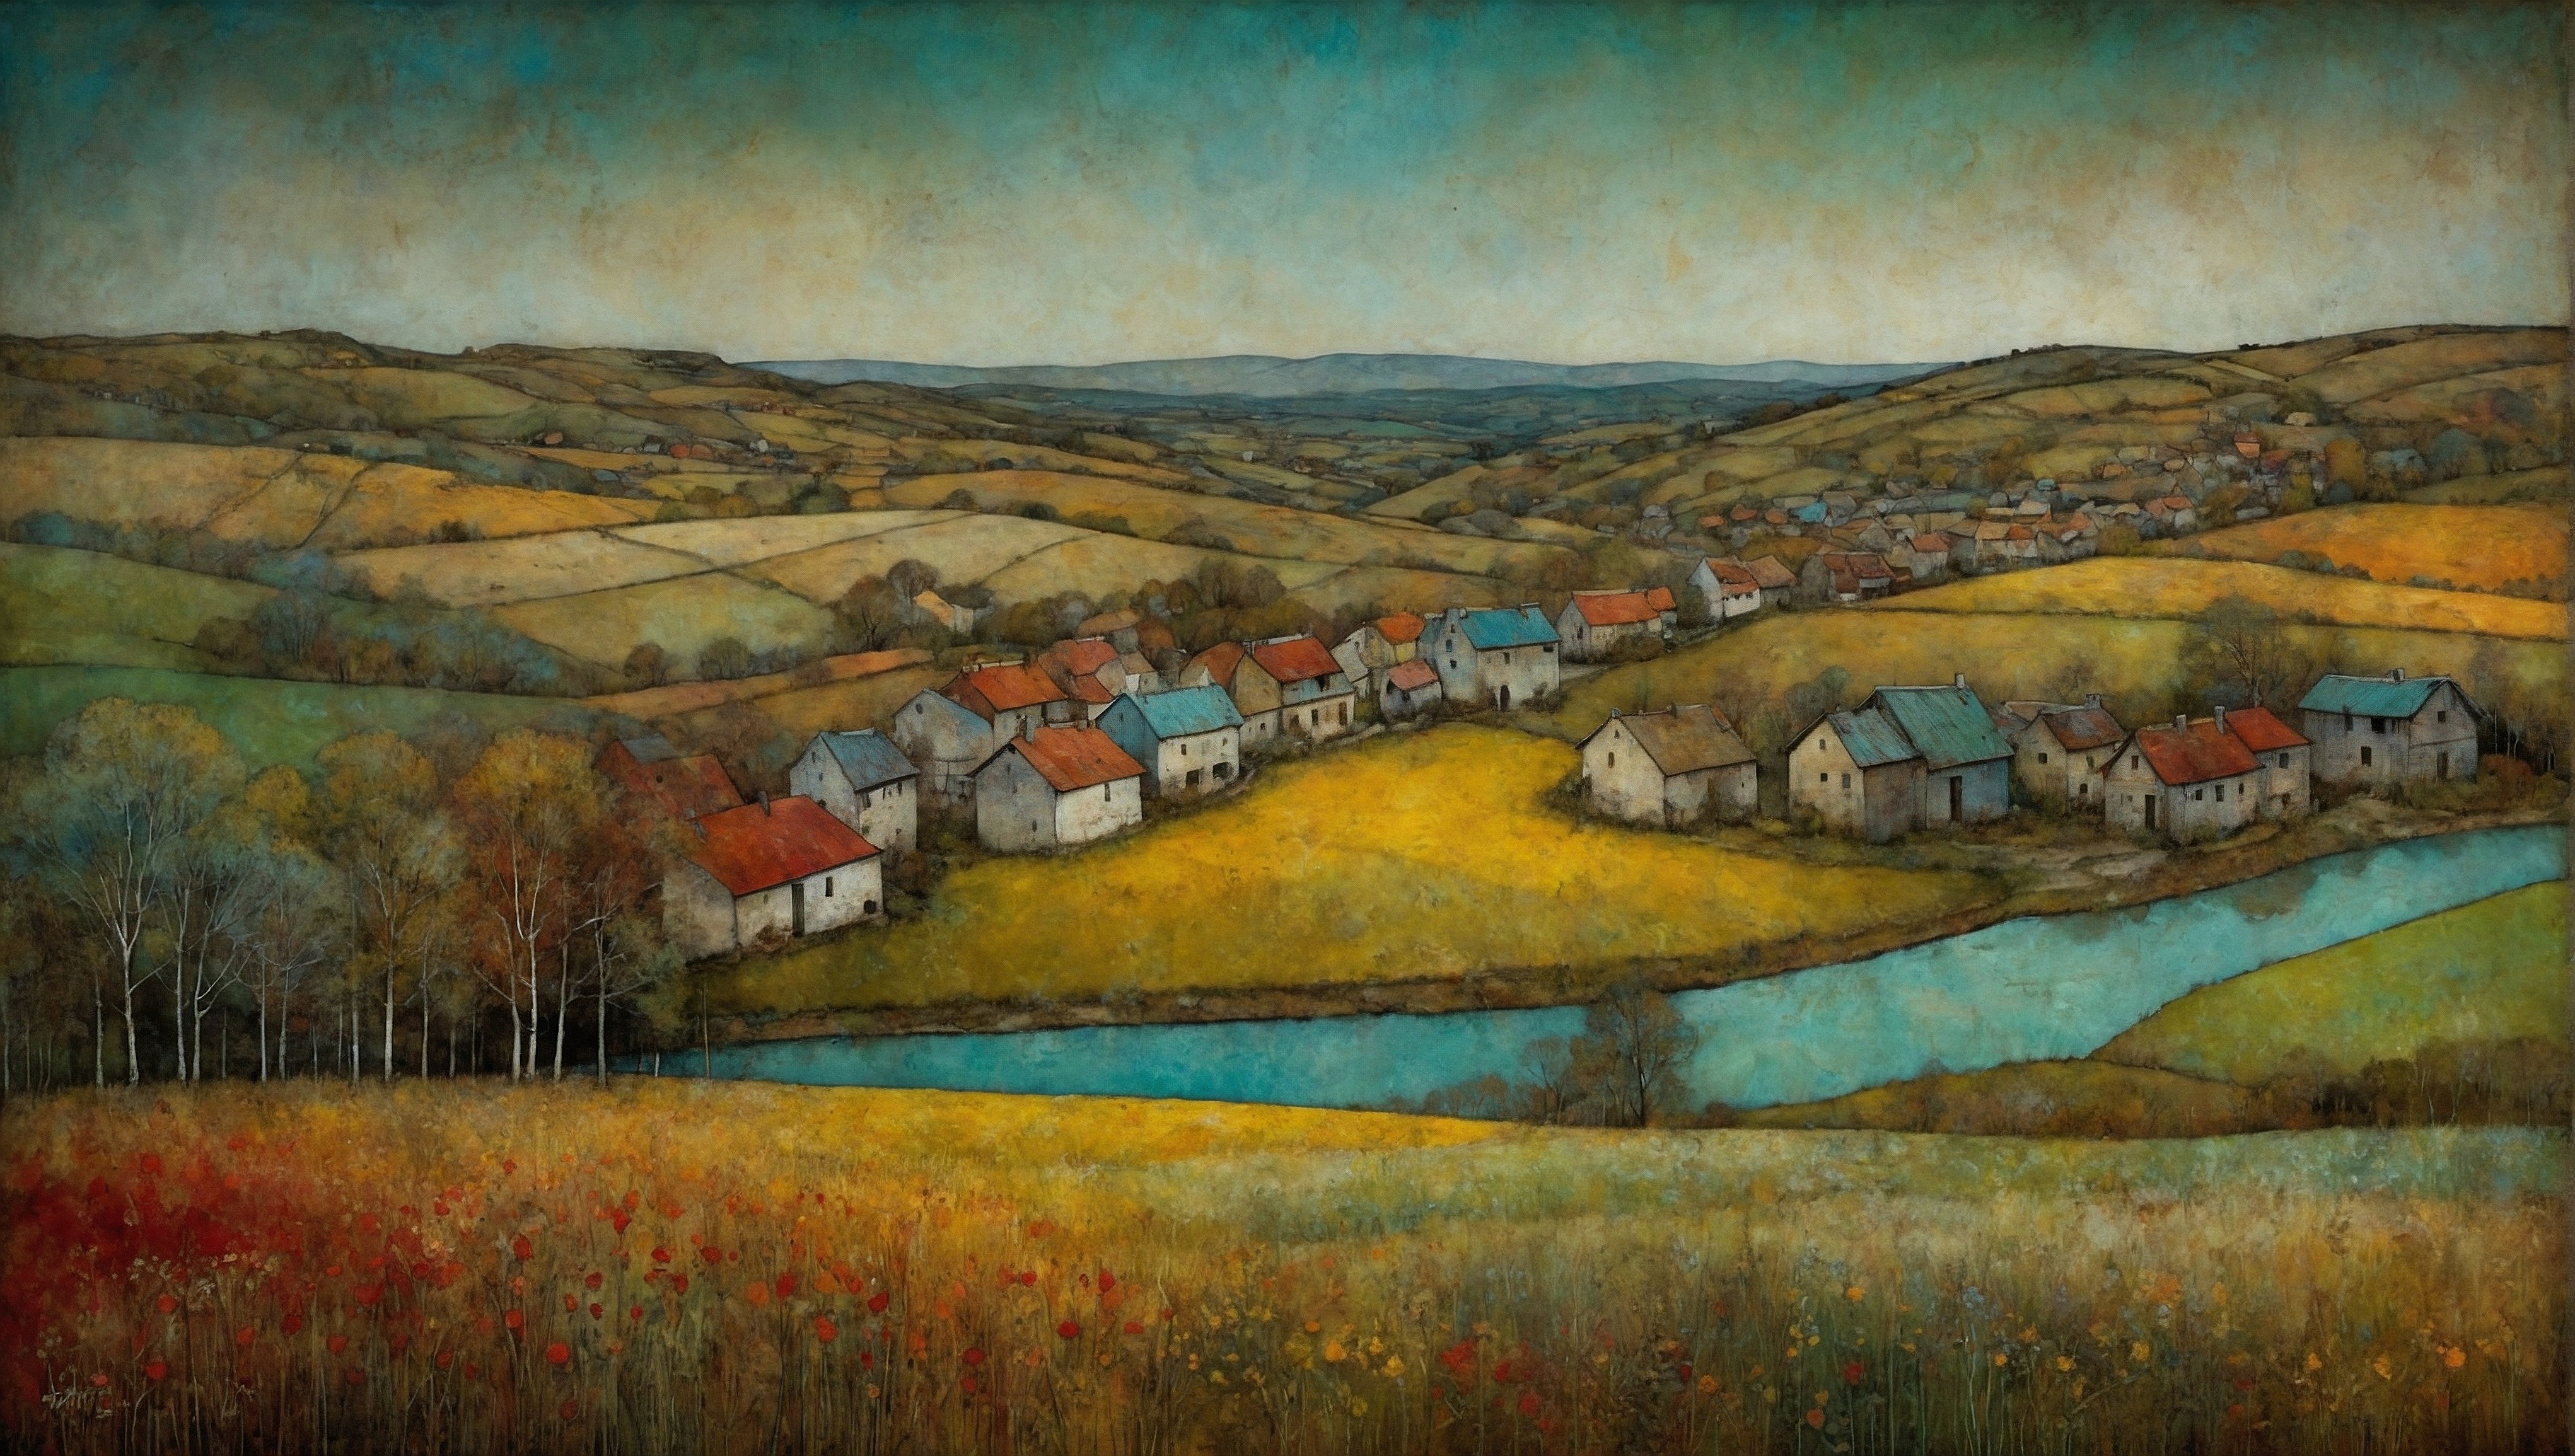 An artistic painting shows houses on a hilly hillside